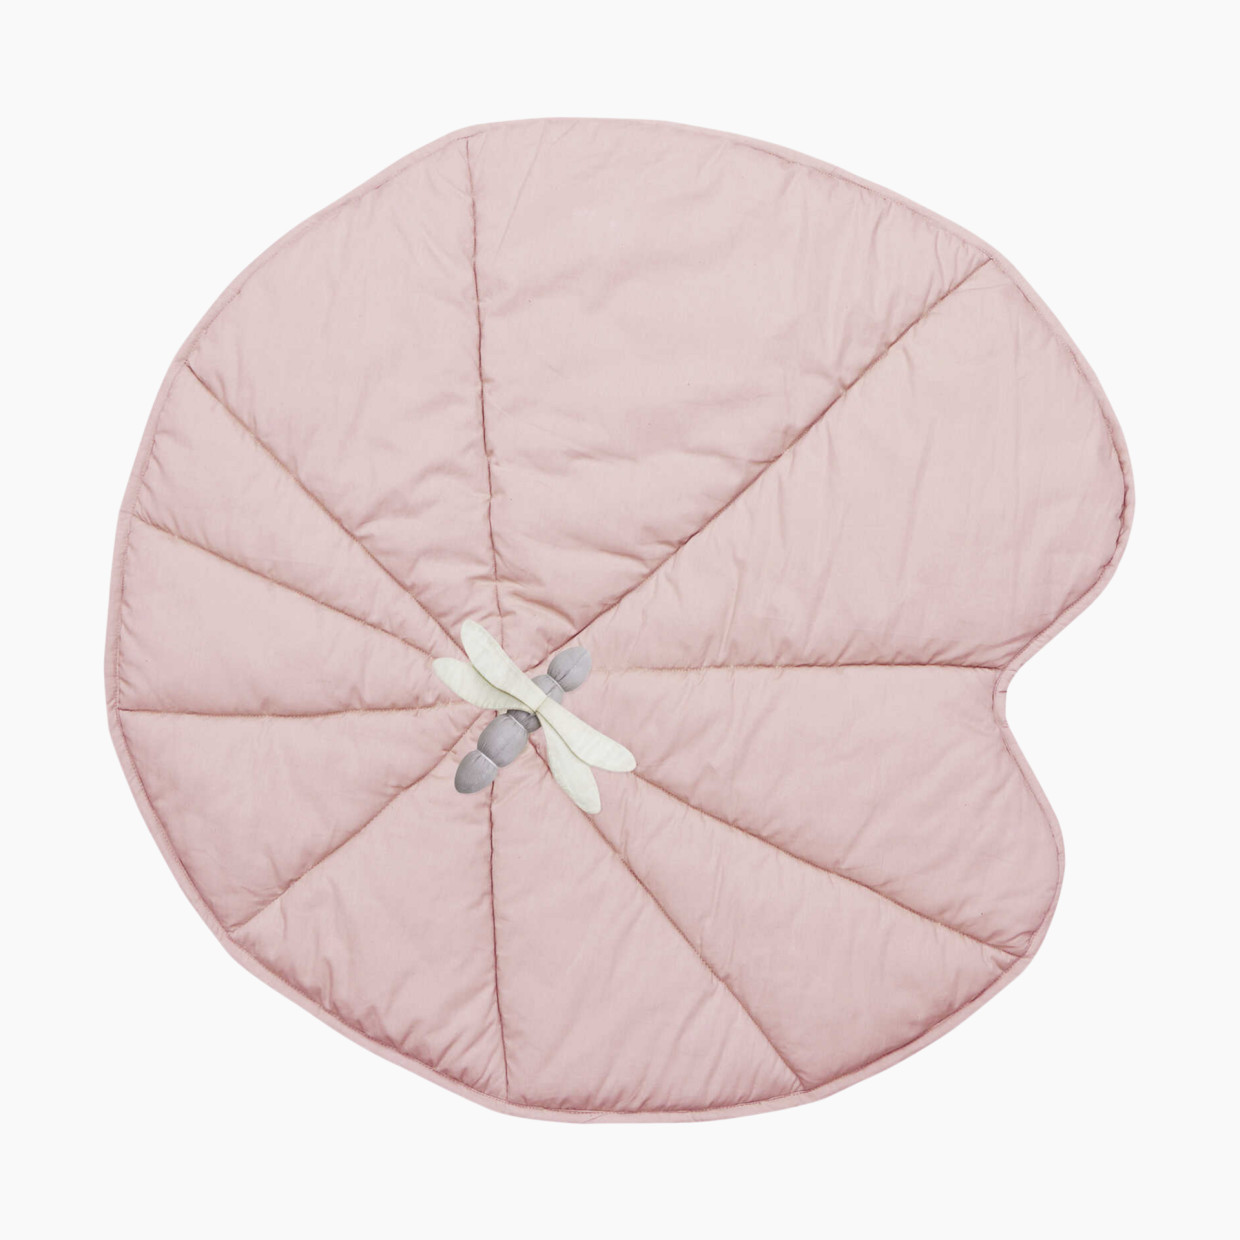 Lorena Canals Water Lily Playmat - Vintage Nude.